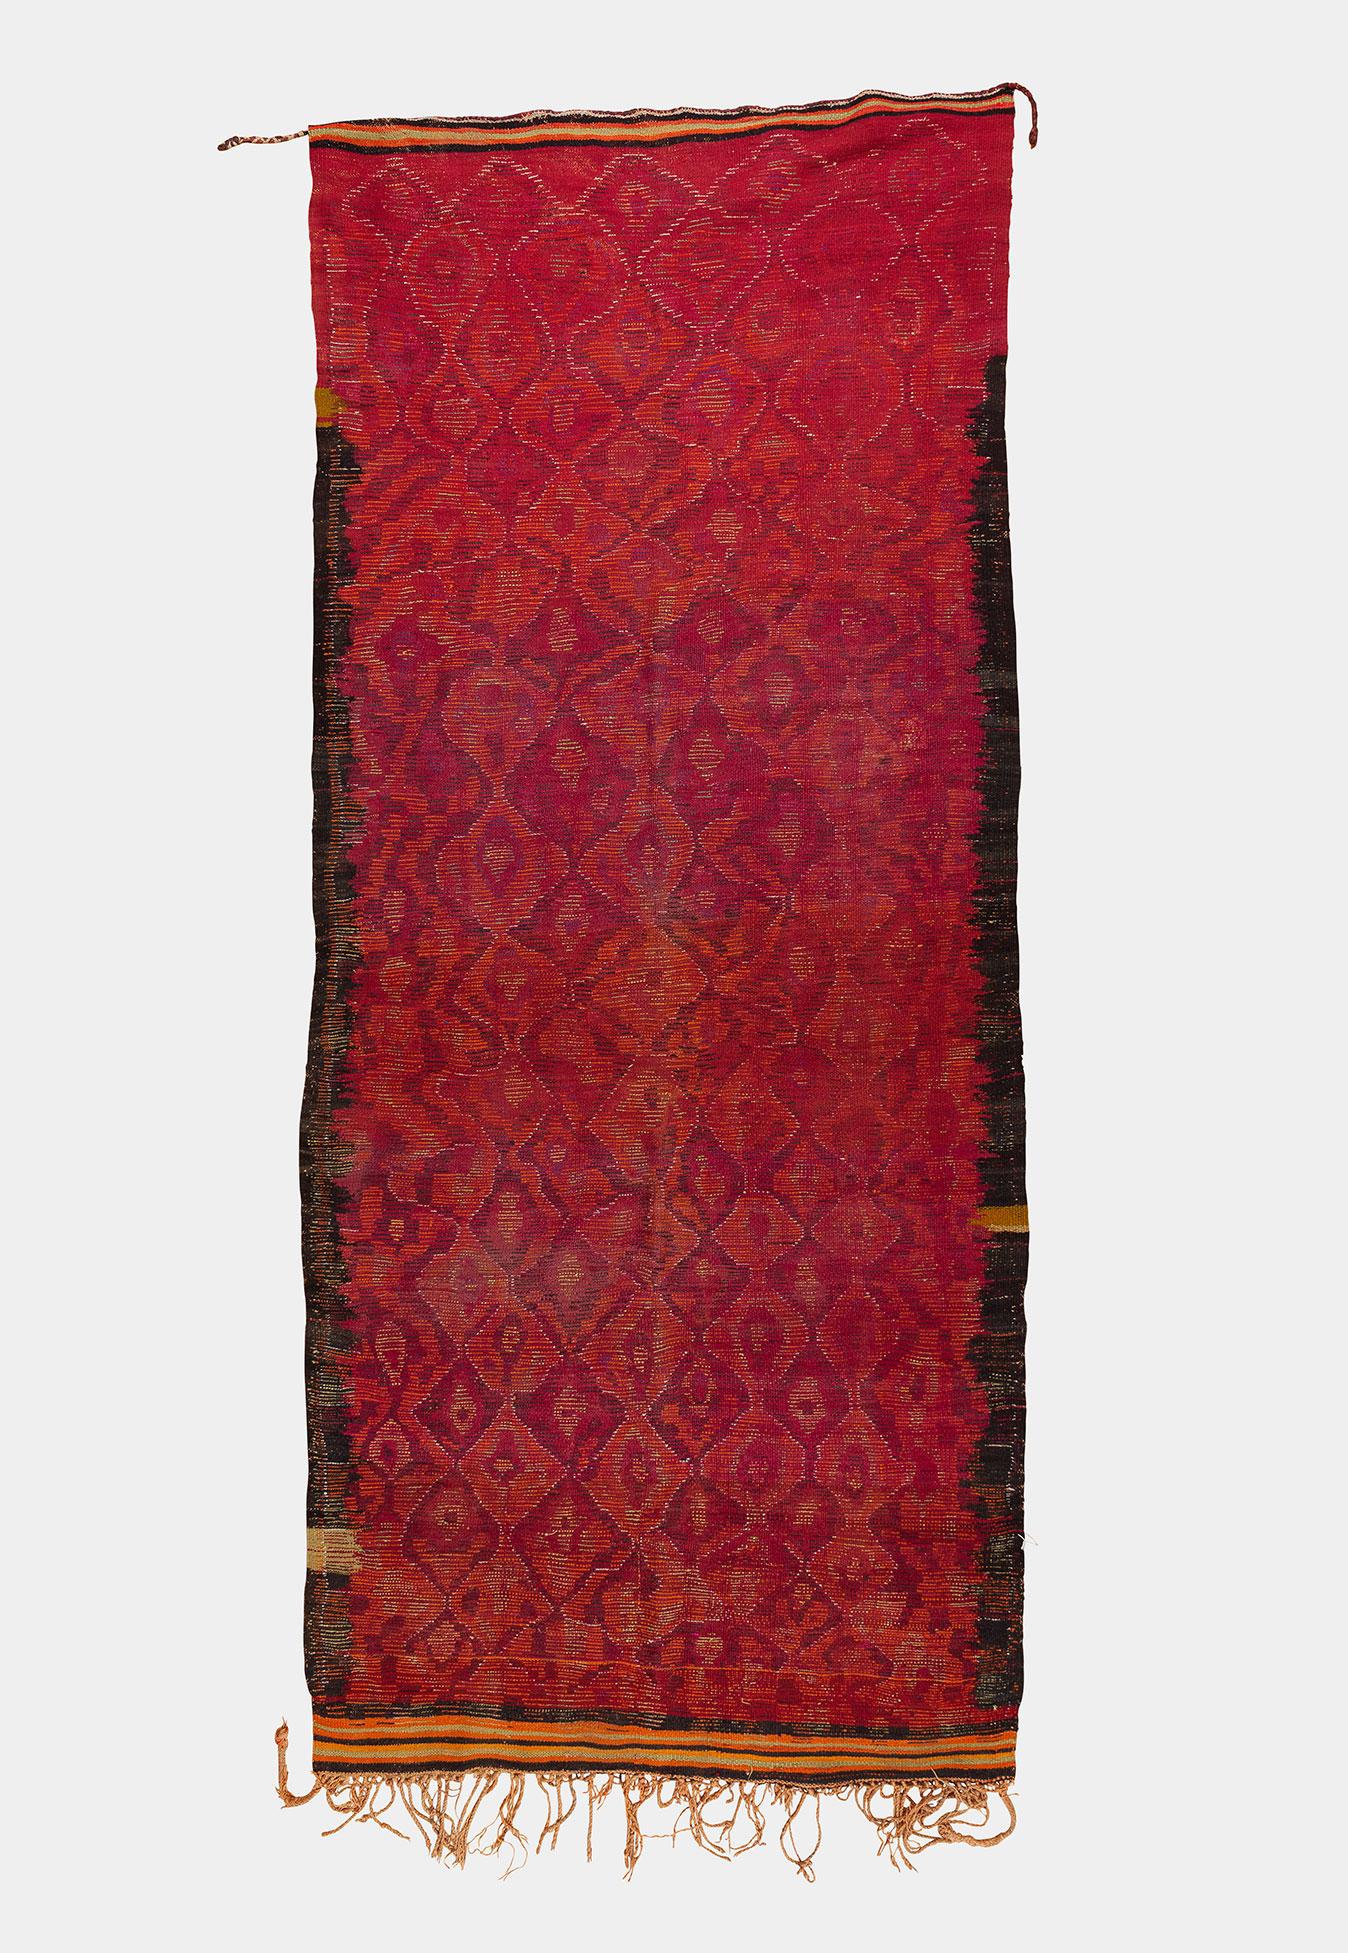 Colorful Moroccan Berber rug from the Ait Bou Ichauen region. Multicolor pattern is typical to the Ait Bou Ichauen tribe that originates from eastern Morocco around the city of Anoual. Medium-thick pile.

This is an authentic Berber carpet from